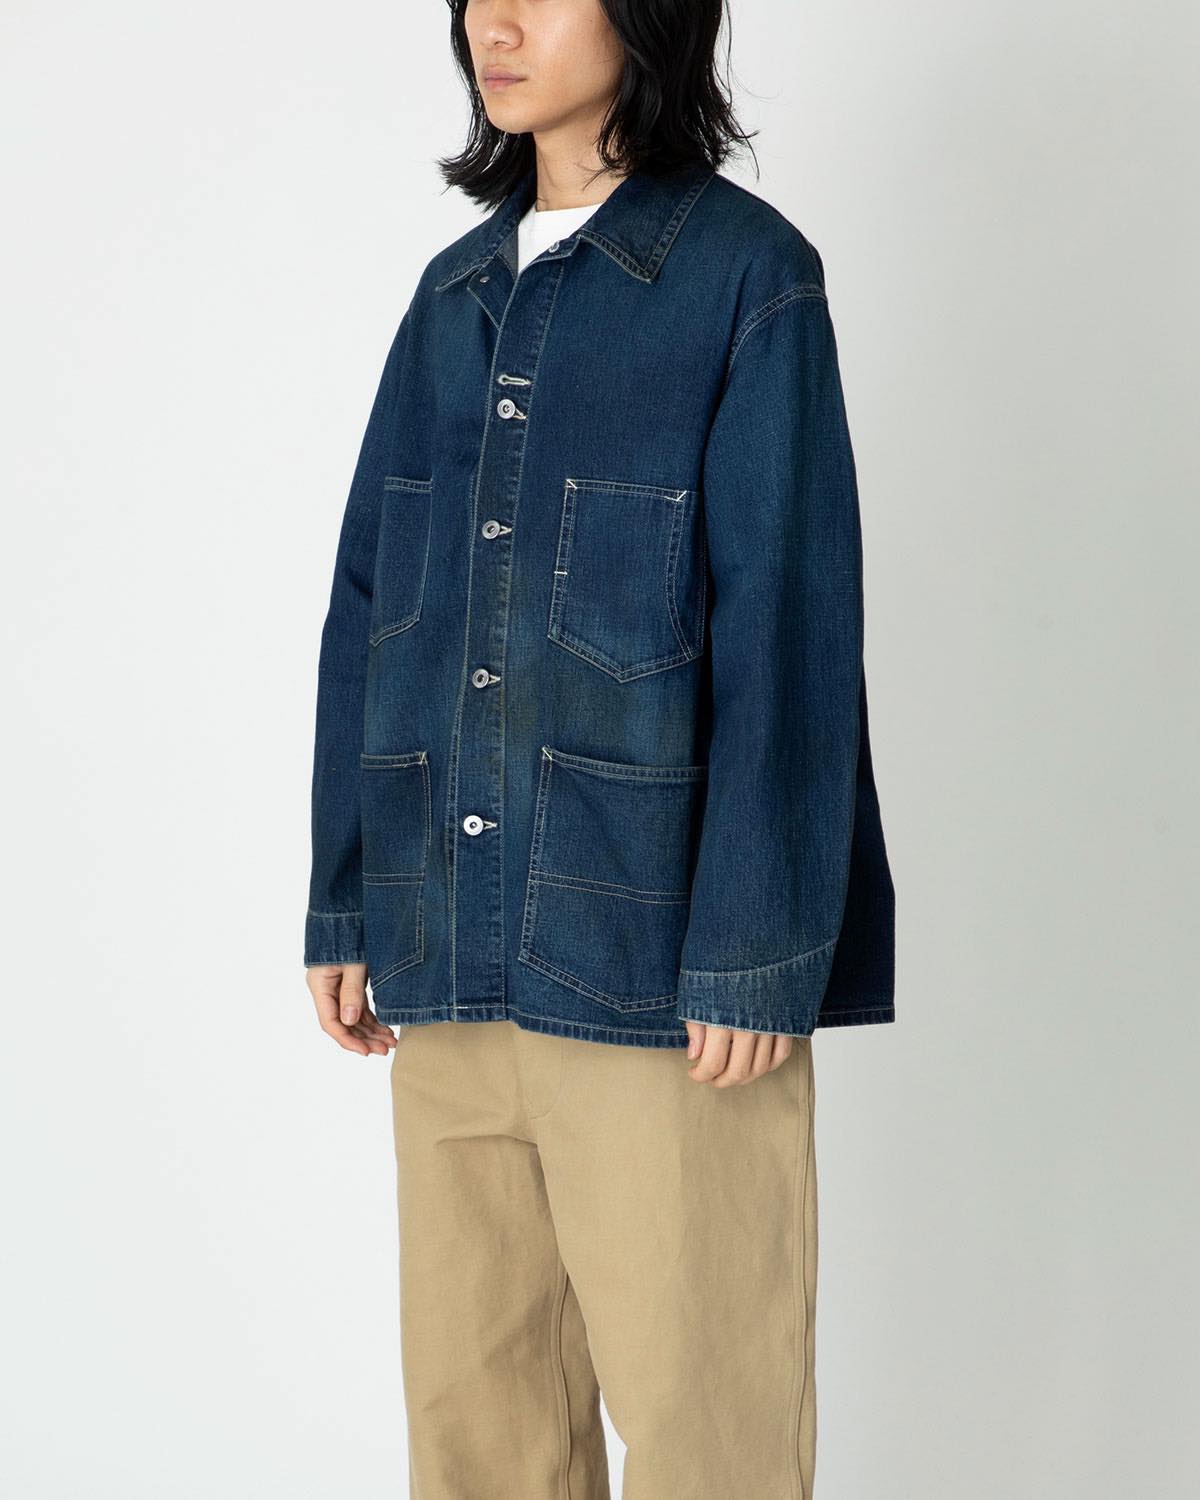 A.PRESSE Coverall Jacket size1 - ジャケット・アウター